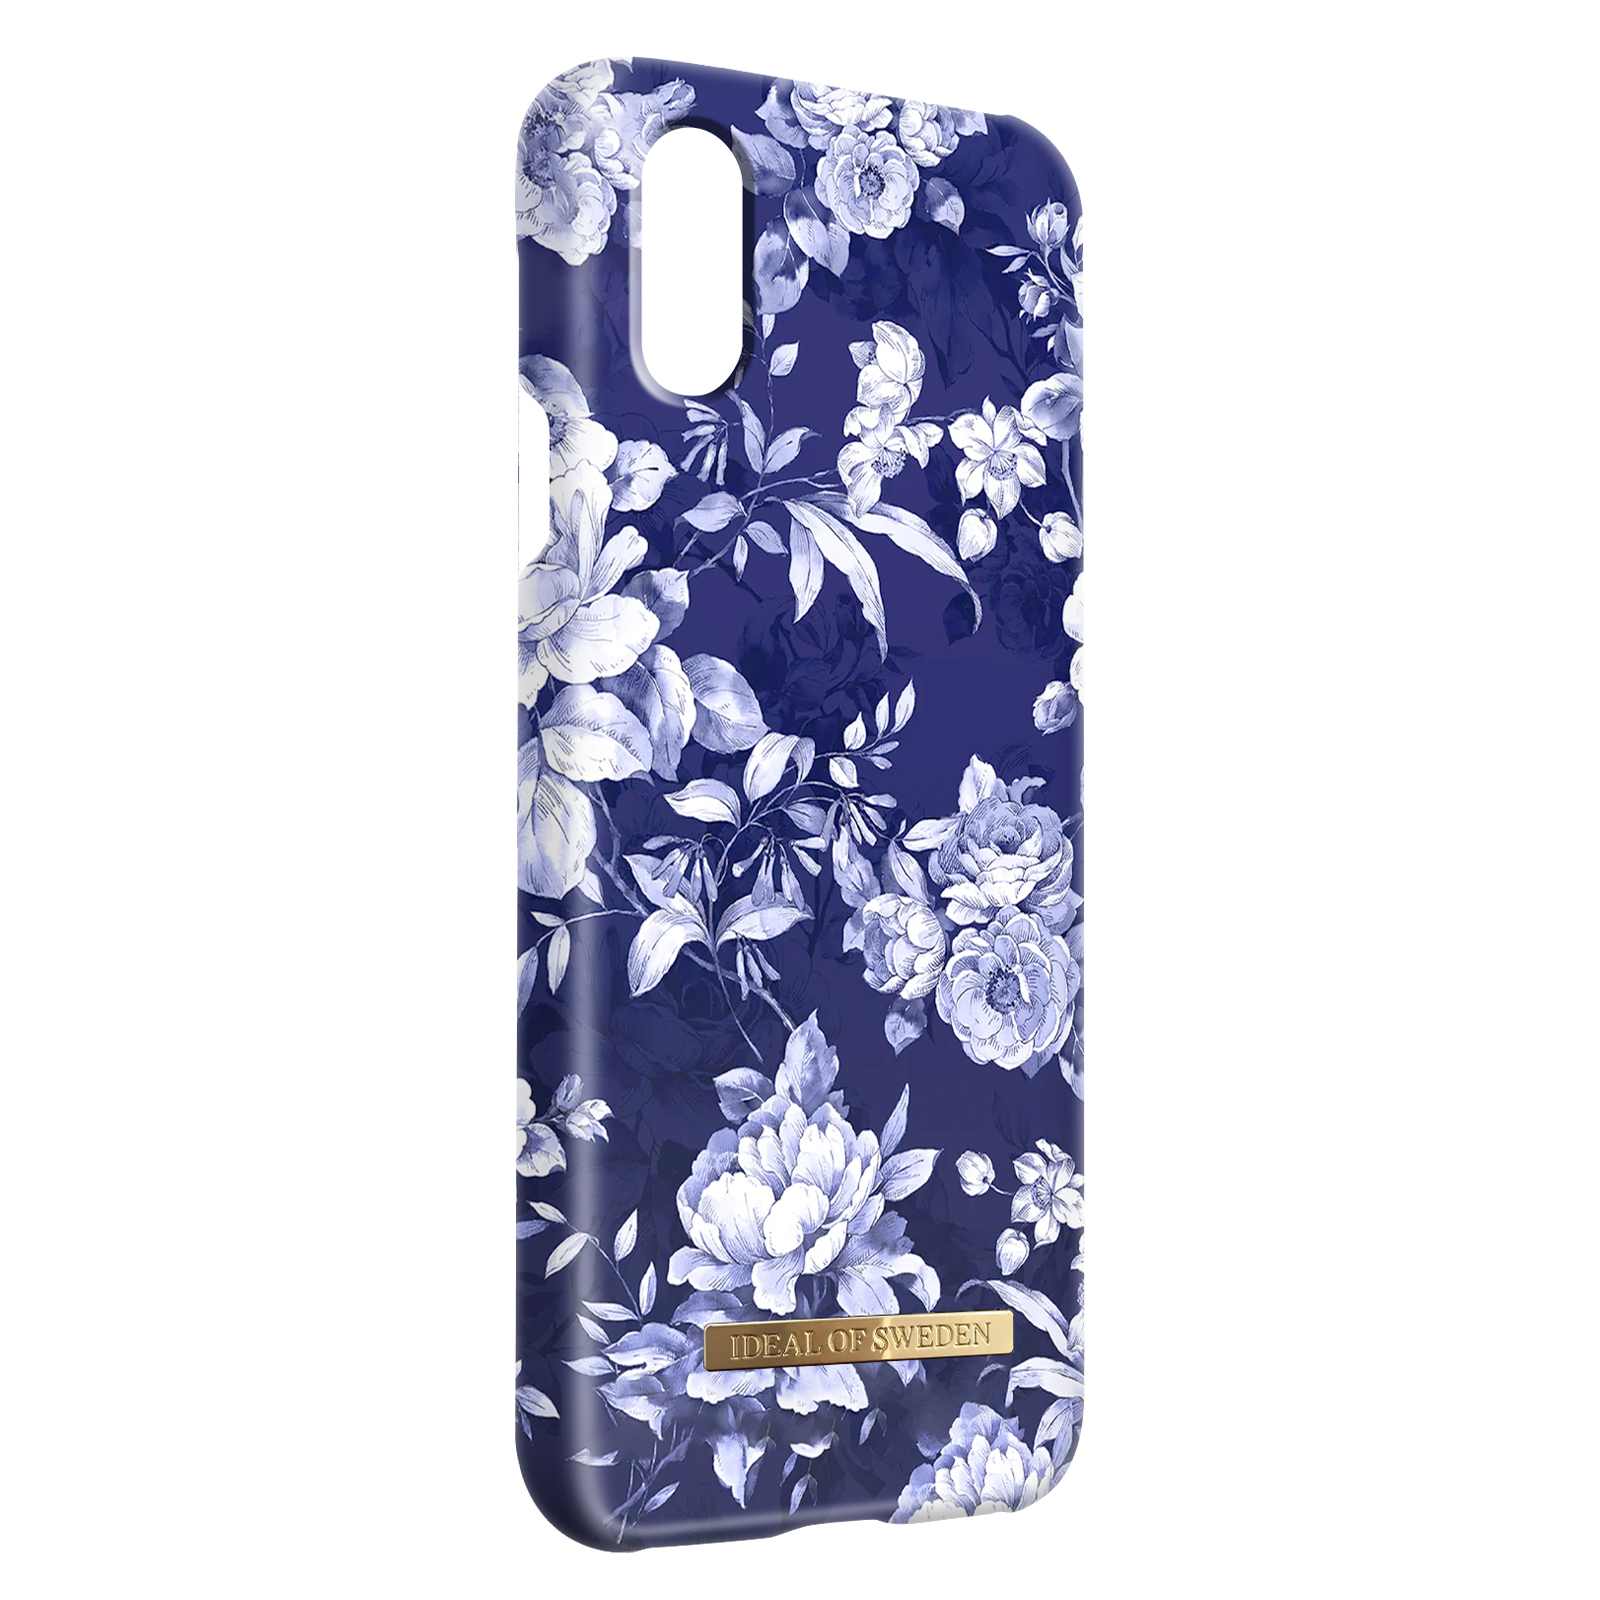 XS OF Apple, Backcover, Max, IDEAL Blau Bloom iPhone Sailor Series, Hülle SWEDEN Blue